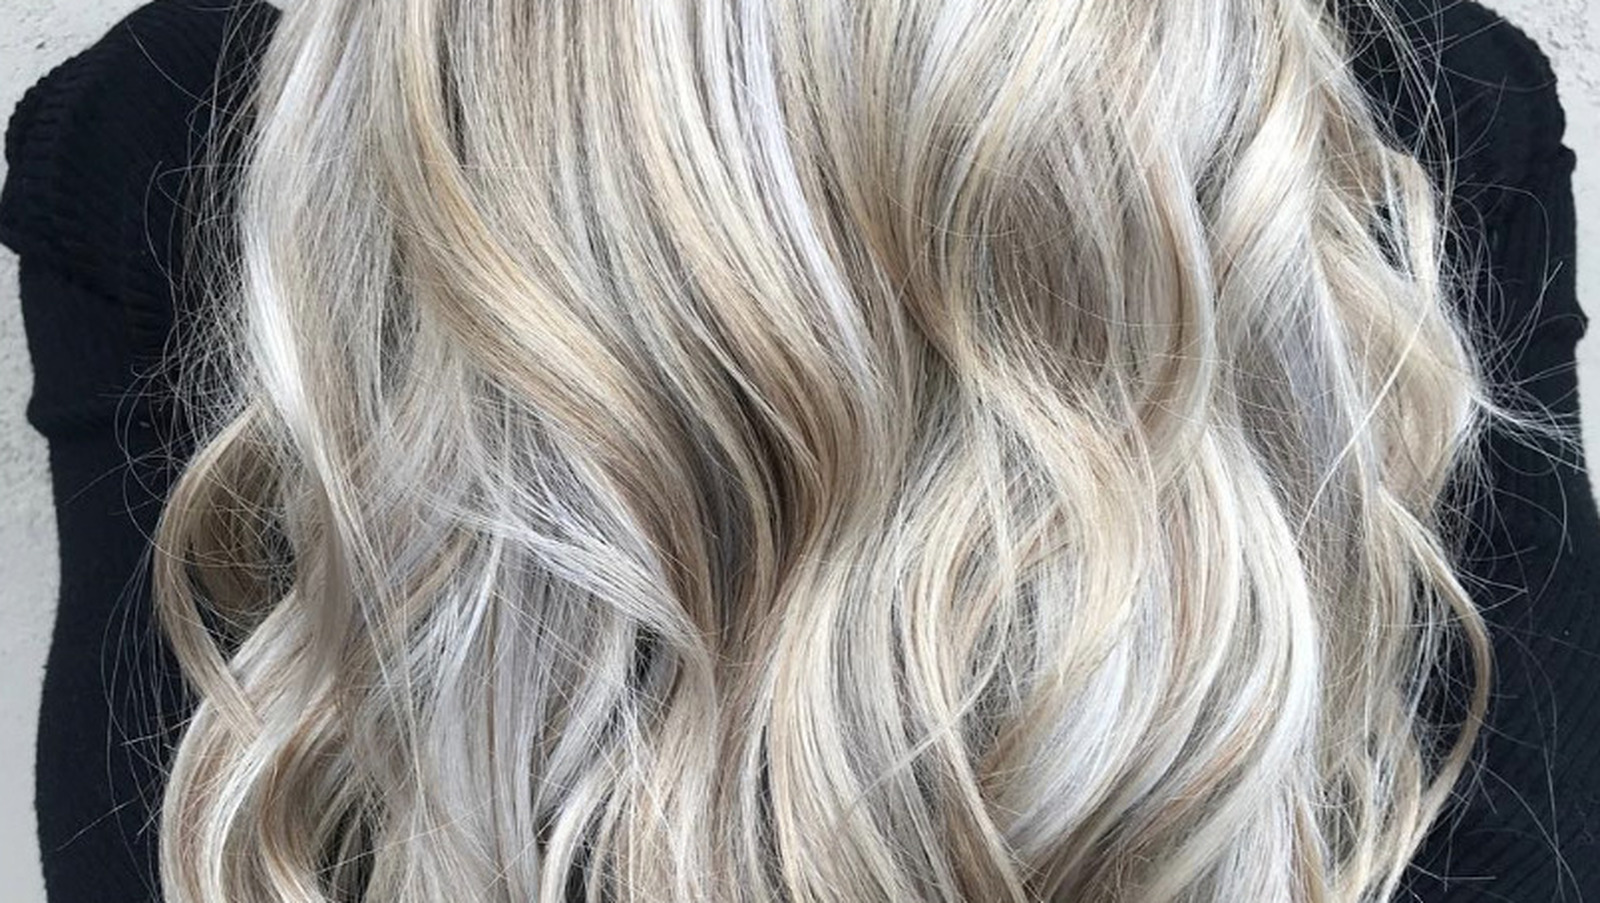 How to get gray hair with blue highlights at home - wide 9